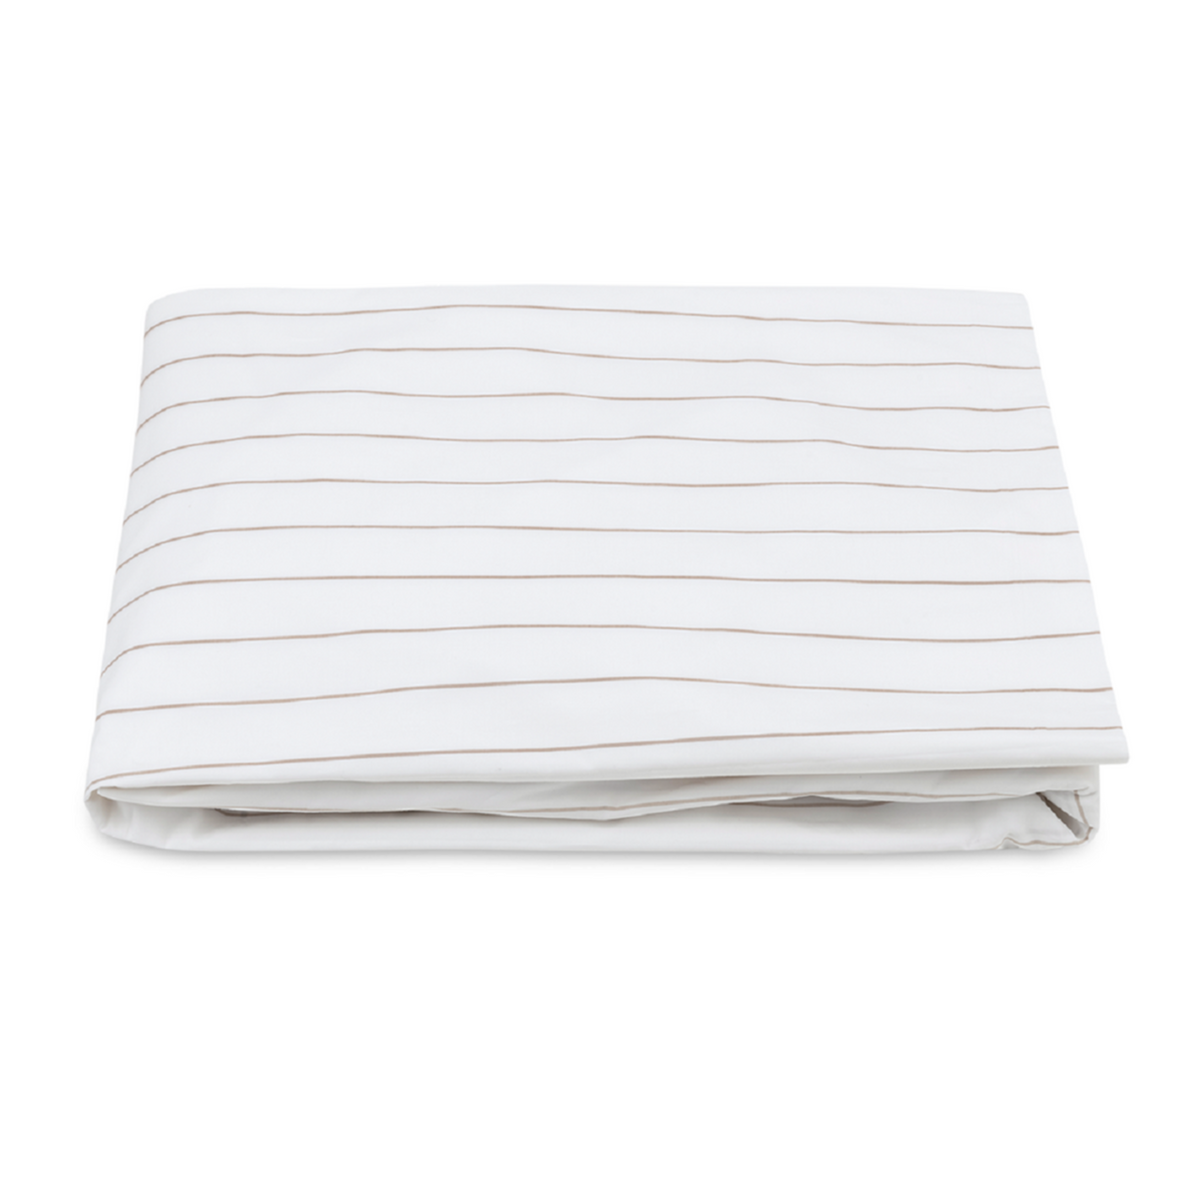 Folded Fitted Sheet of Matouk Amalfi Bedding in Dune Color